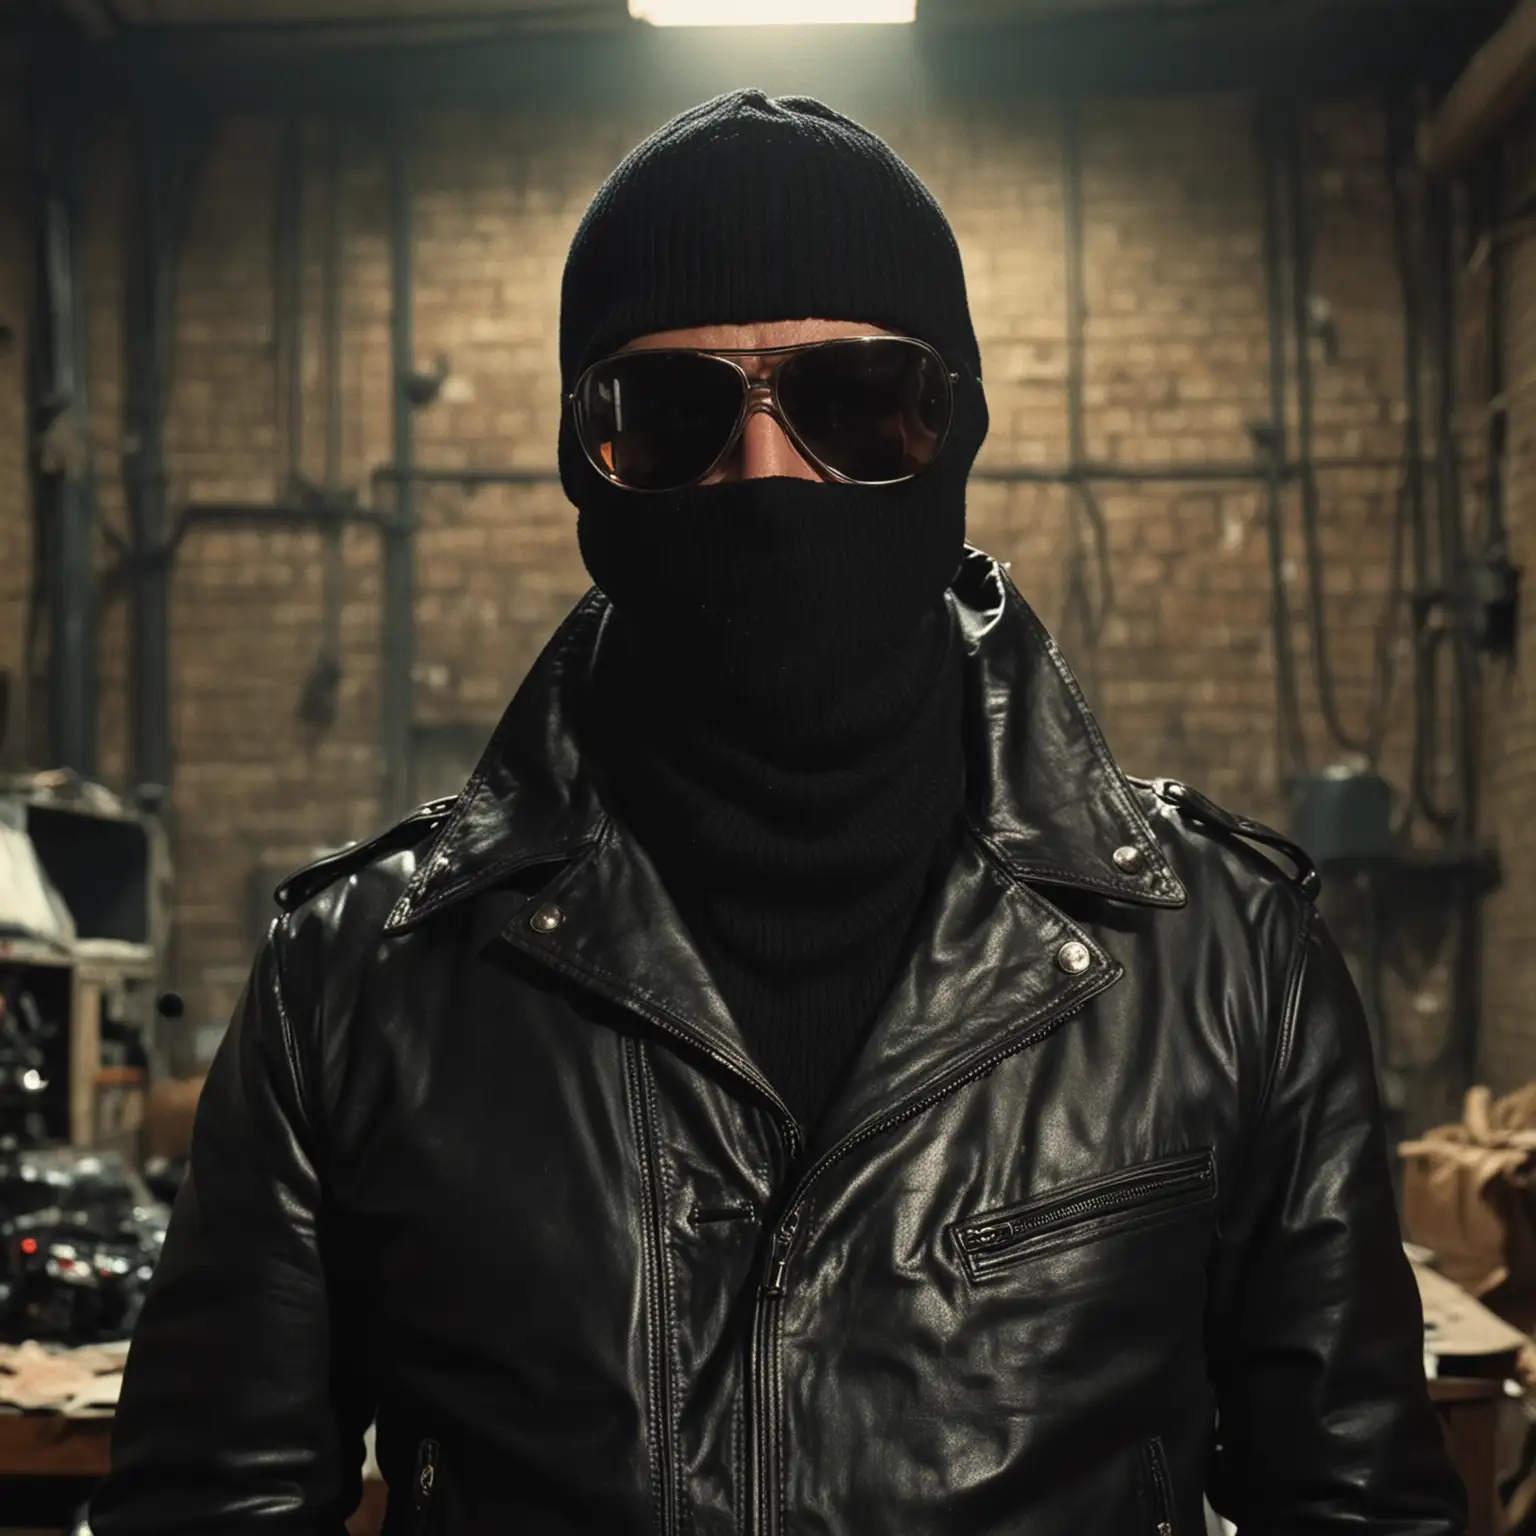 Angry Private Detective in Balaclava and Sunglasses with Gun in Dark Warehouse